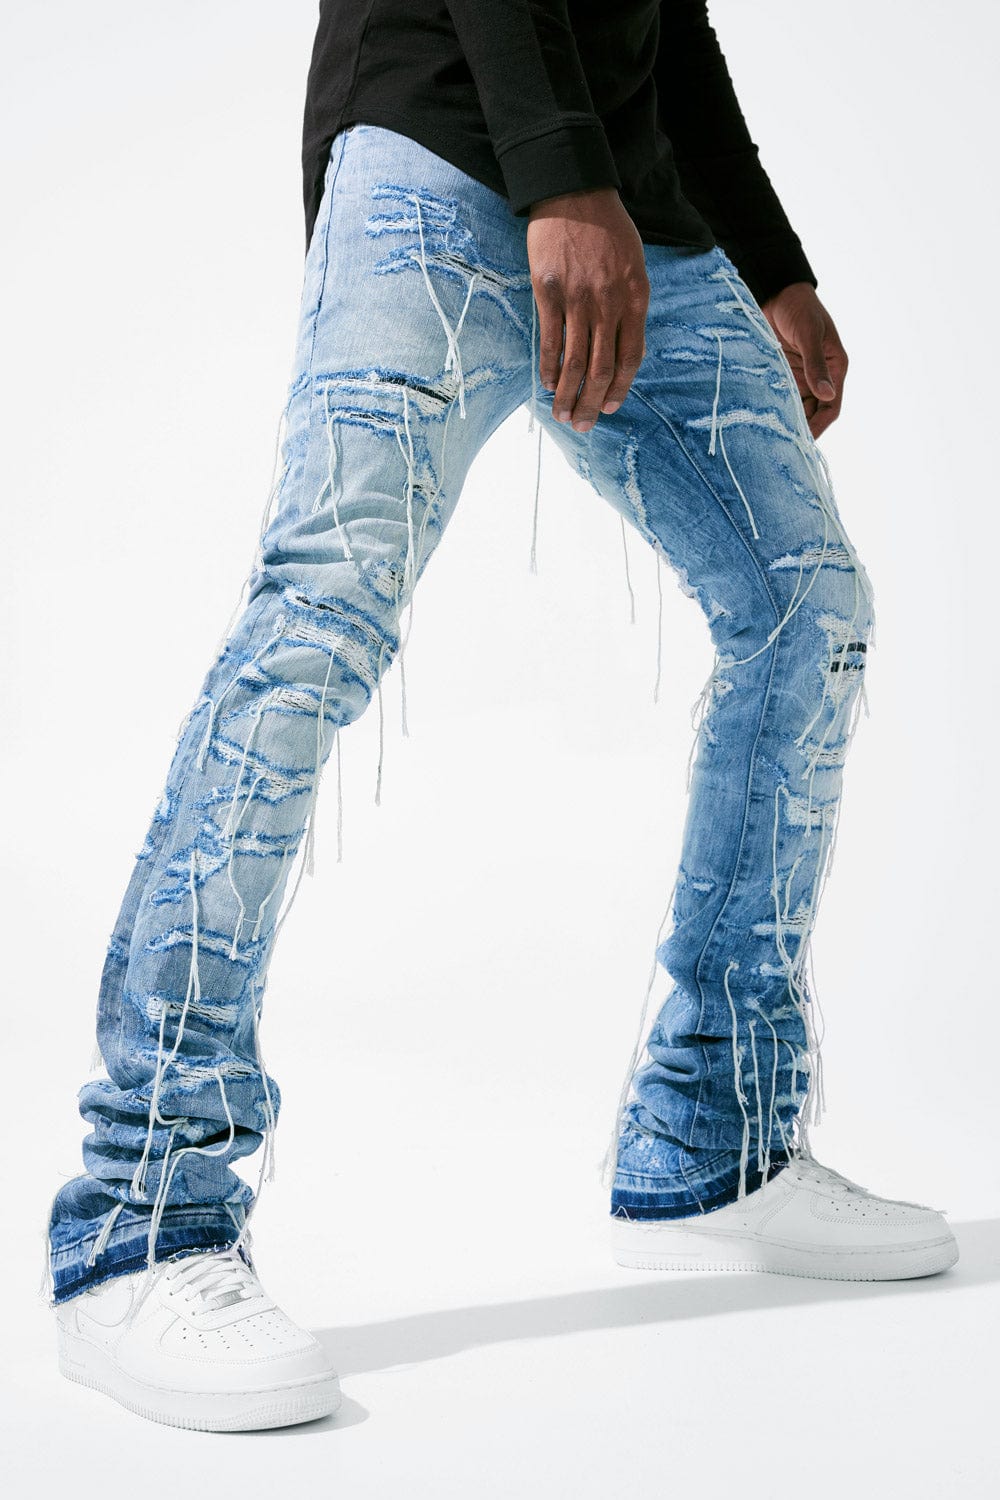 Manfinity EMRG Men Solid Ripped Jeans | SHEIN USA